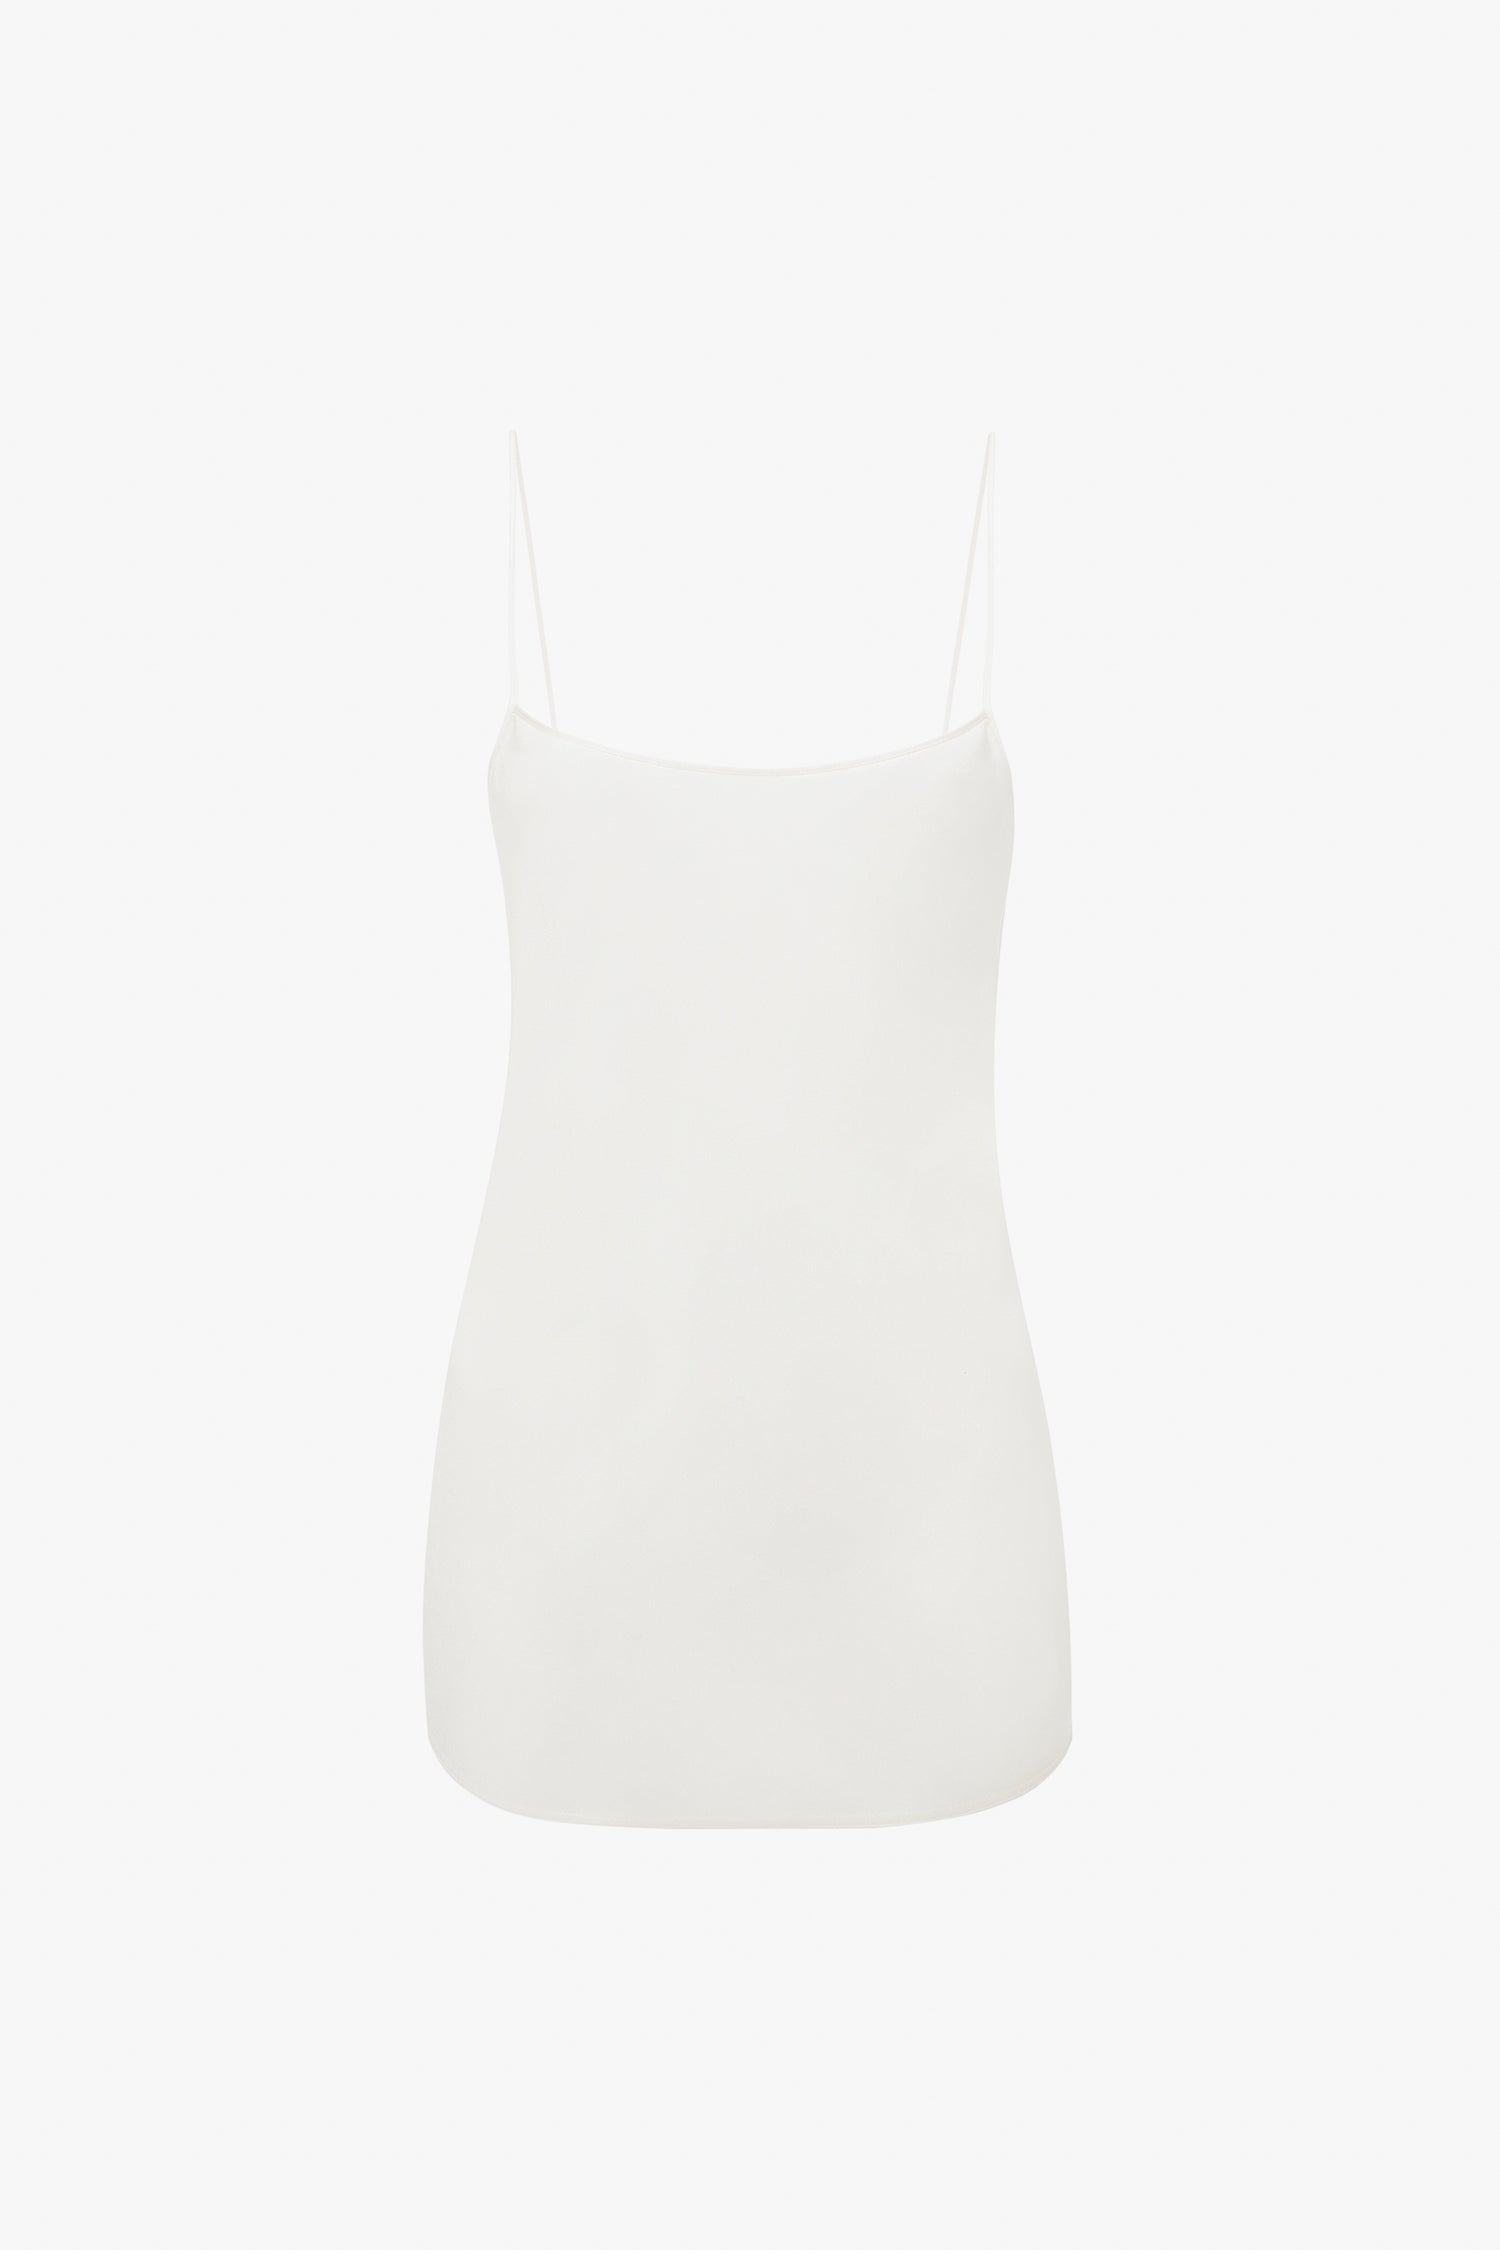 An Exclusive Cami Top In Ivory by Victoria Beckham, crafted from 100% silk, featuring thin shoulder straps for a delicate touch.